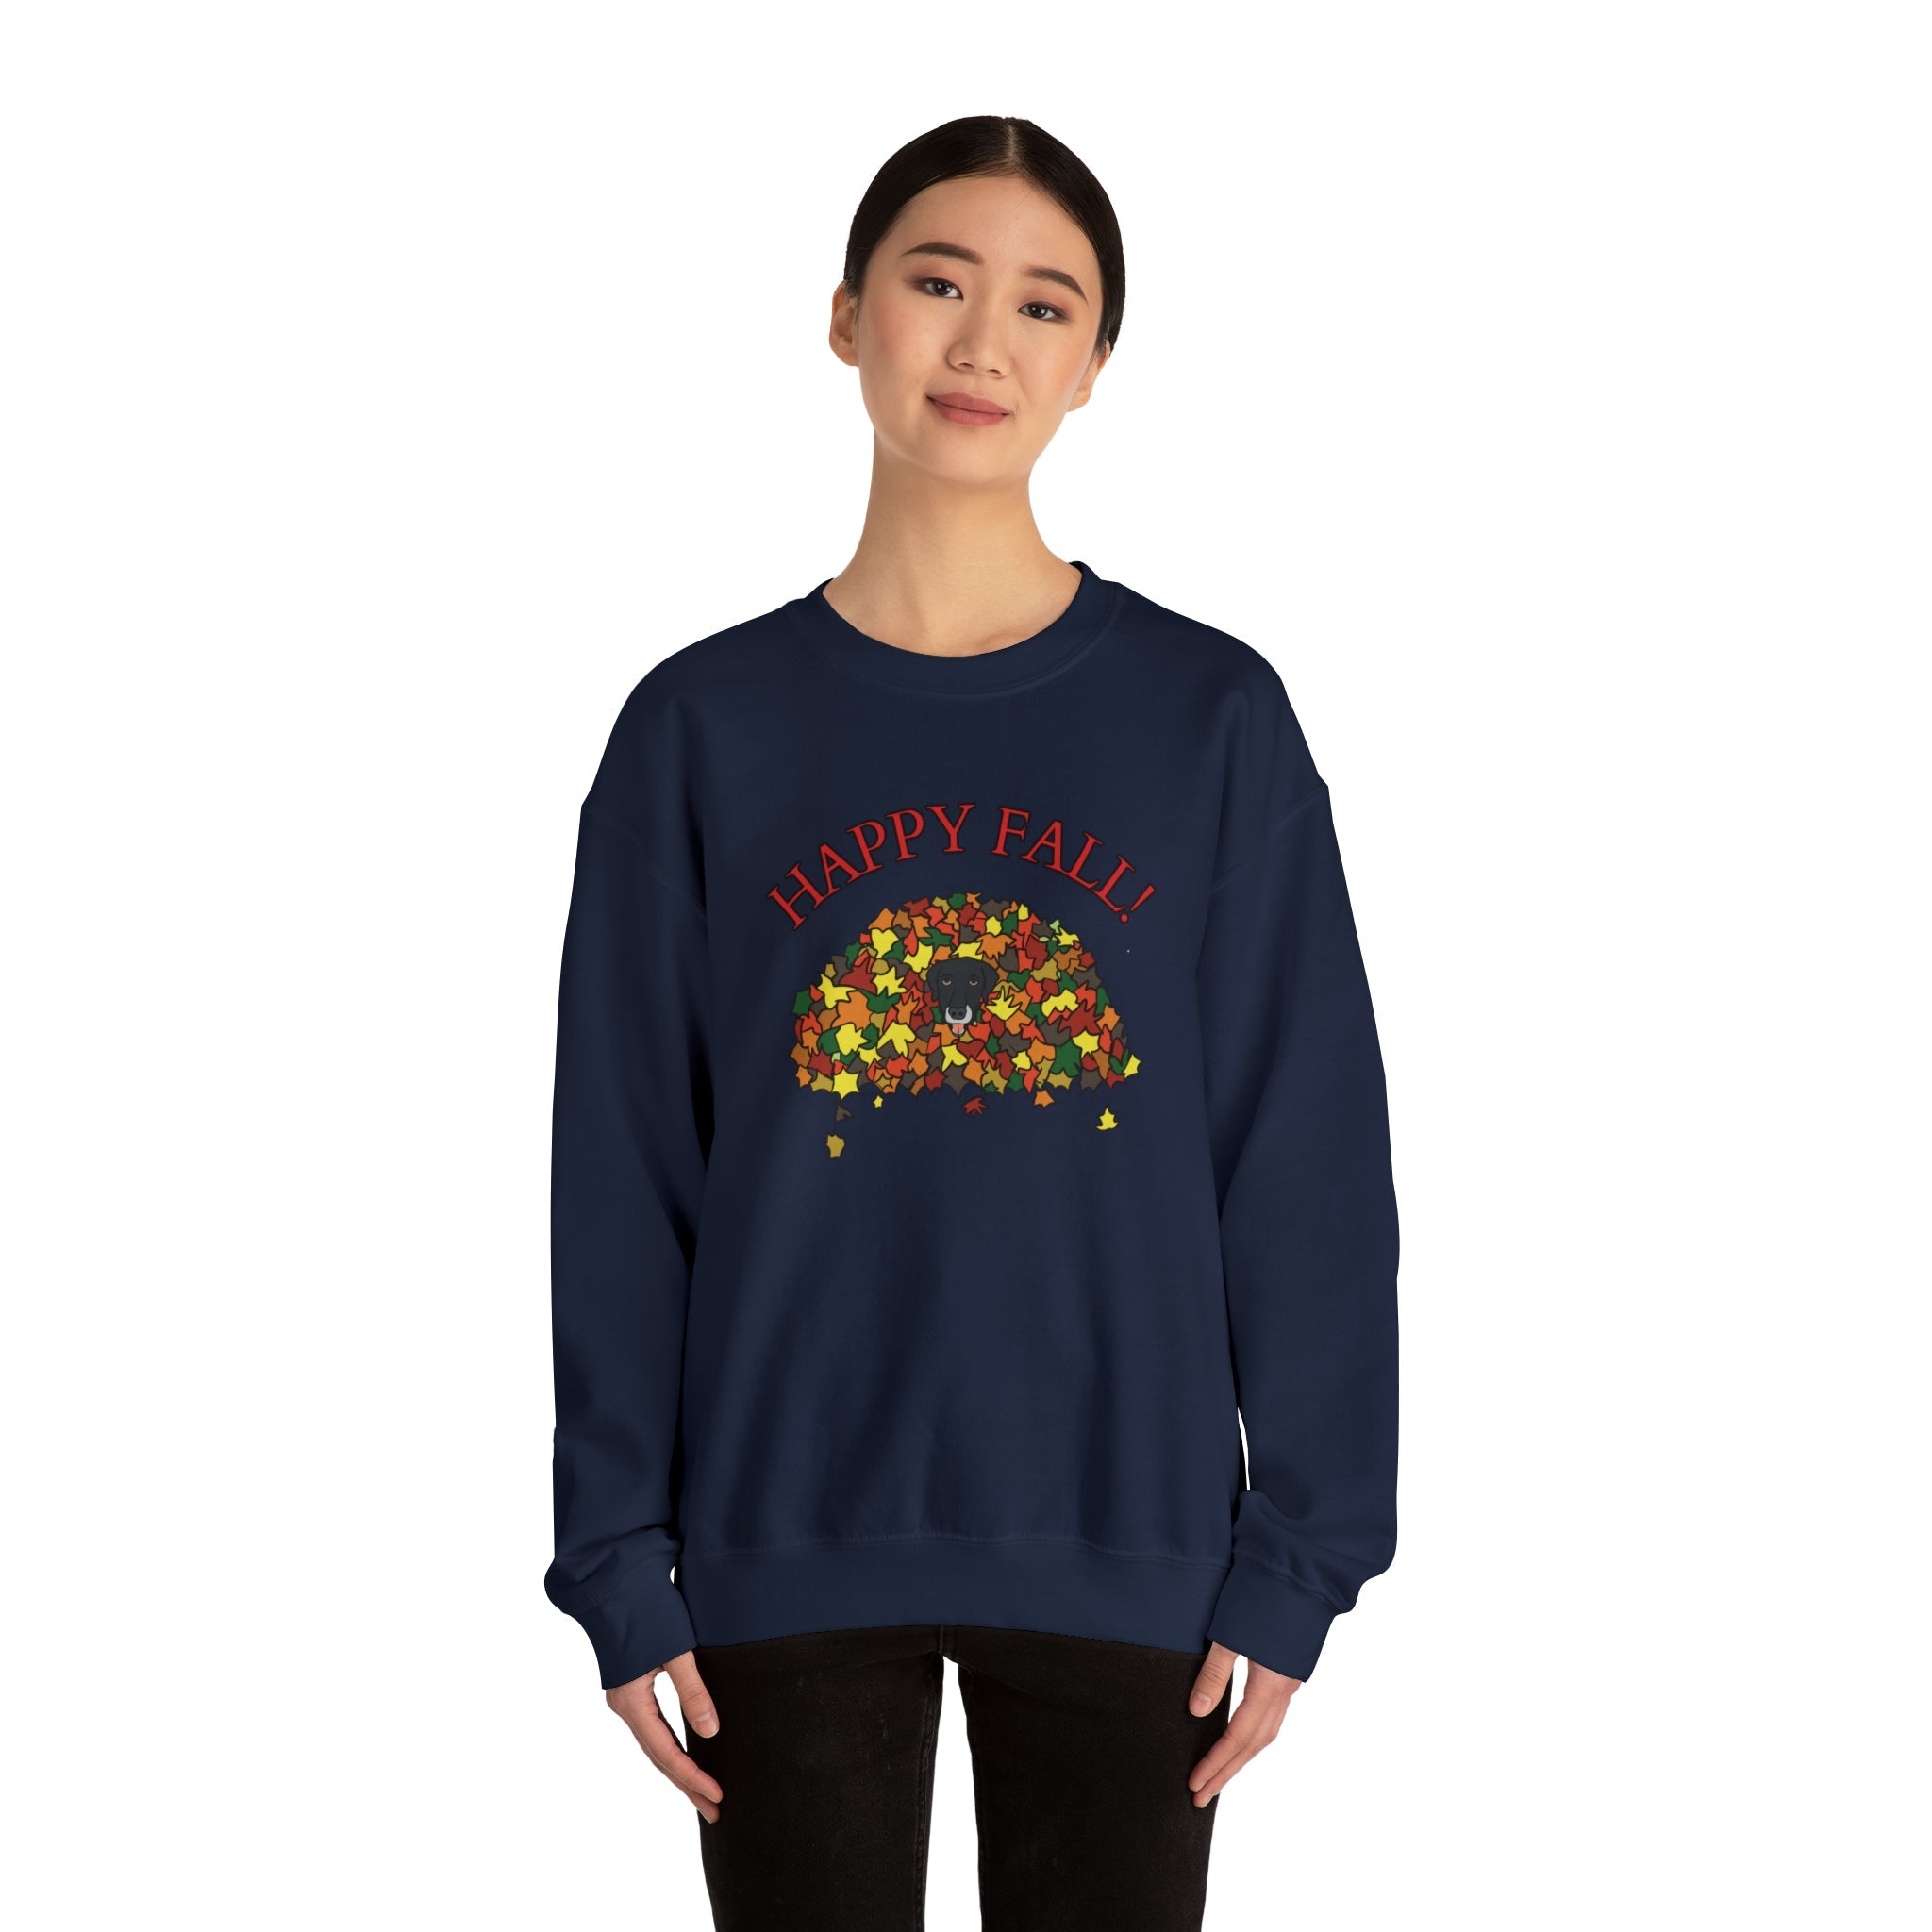 Hiding in the Leaf Pile Crewneck Sweatshirt - TAILWAGS UNLIMITED